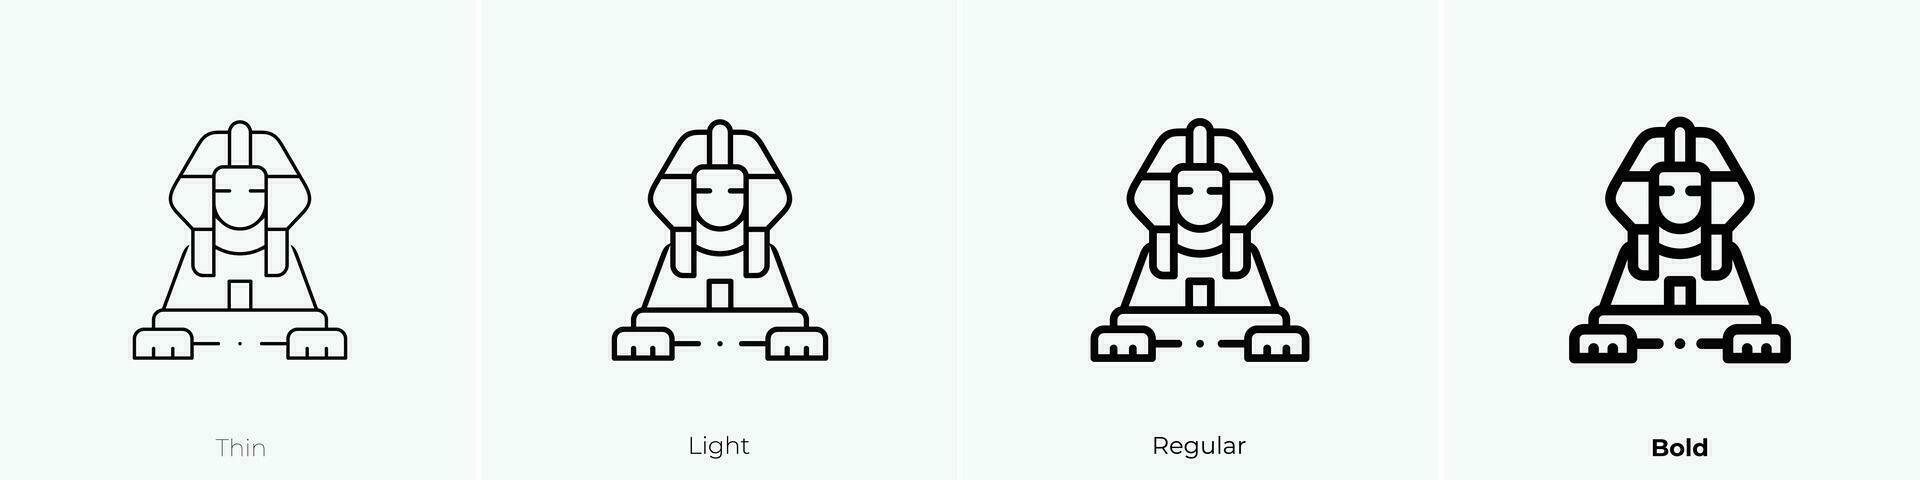 sphinx icon. Thin, Light, Regular And Bold style design isolated on white background vector